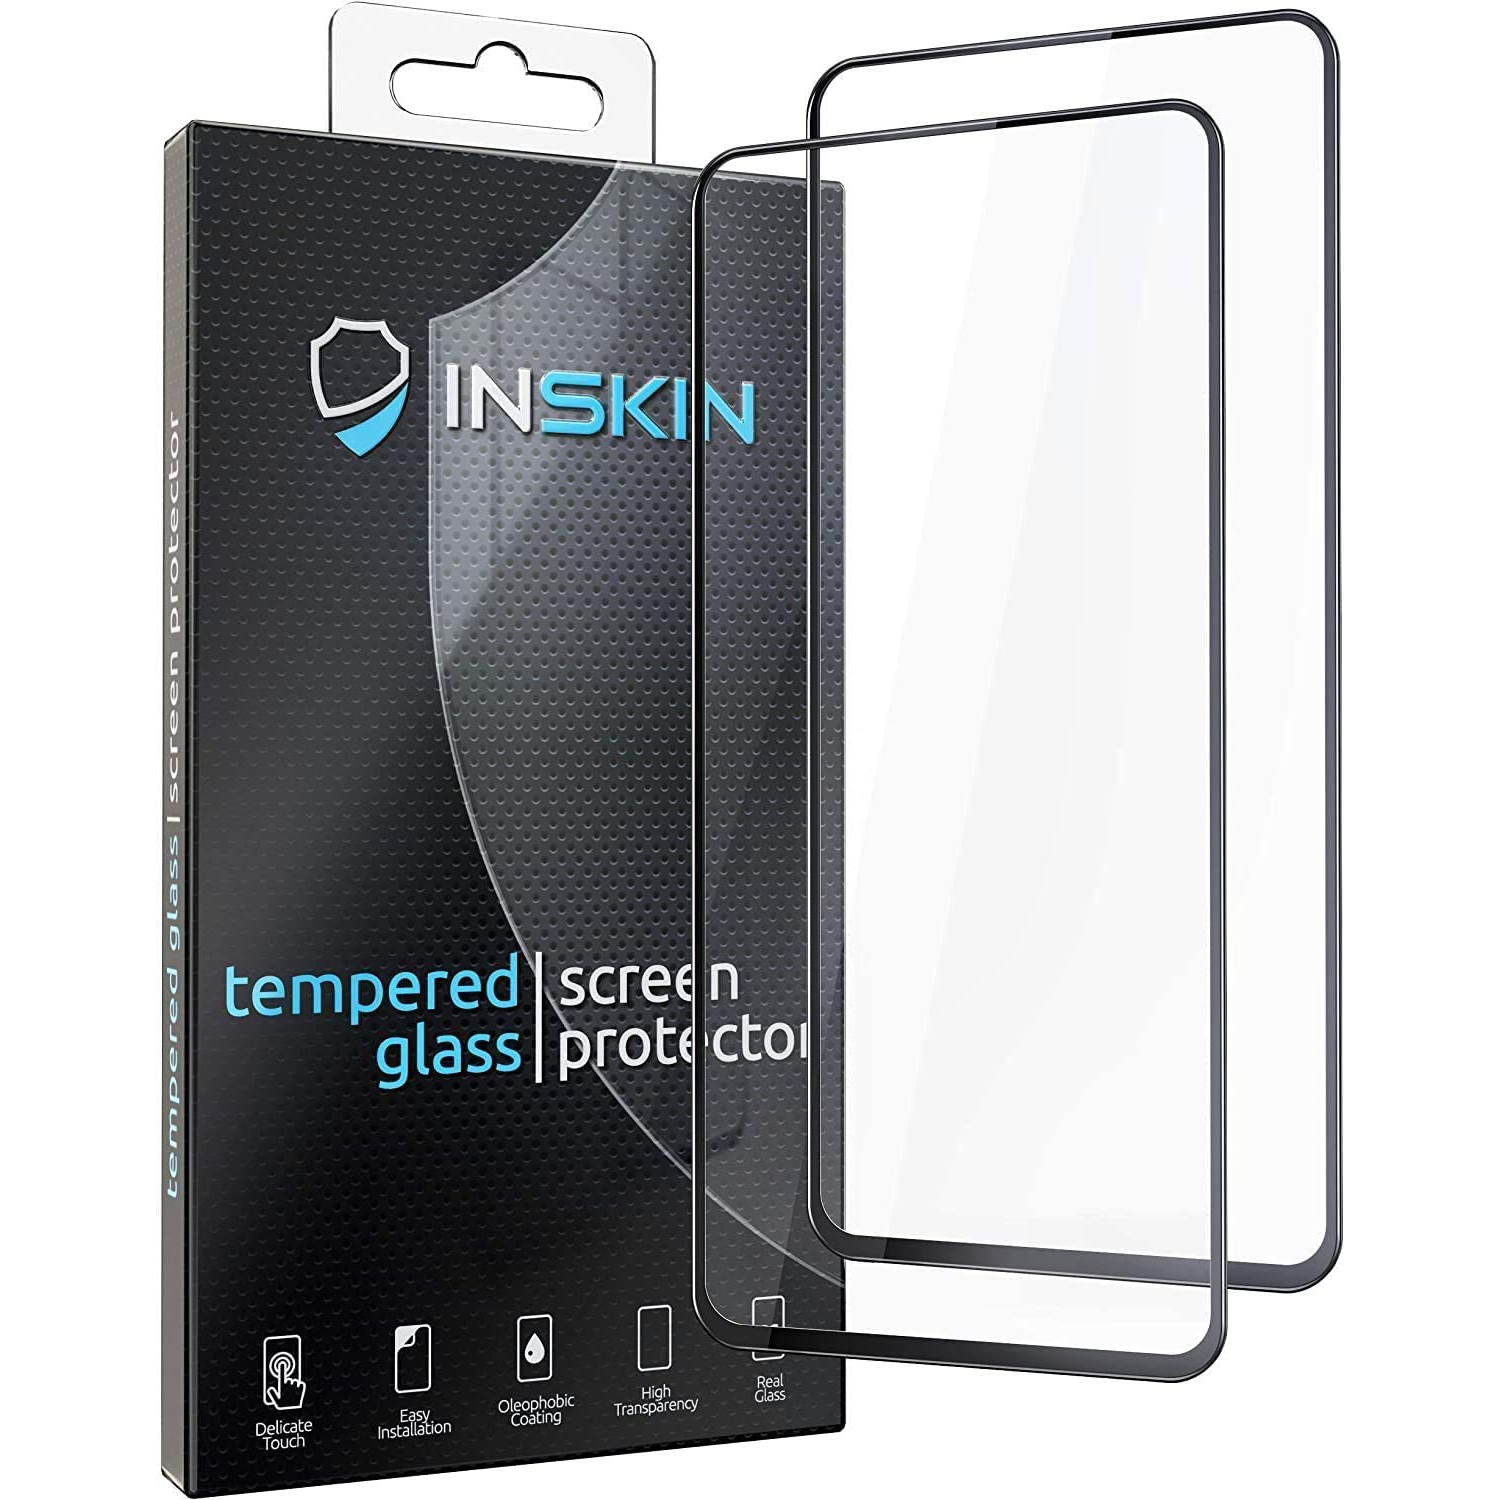 Inskin 2.5D Full Coverage Full Glue Tempered Glass Screen Protector, fits Samsung Galaxy S20 FE 6.5 inch [2020]. 2-Pack.